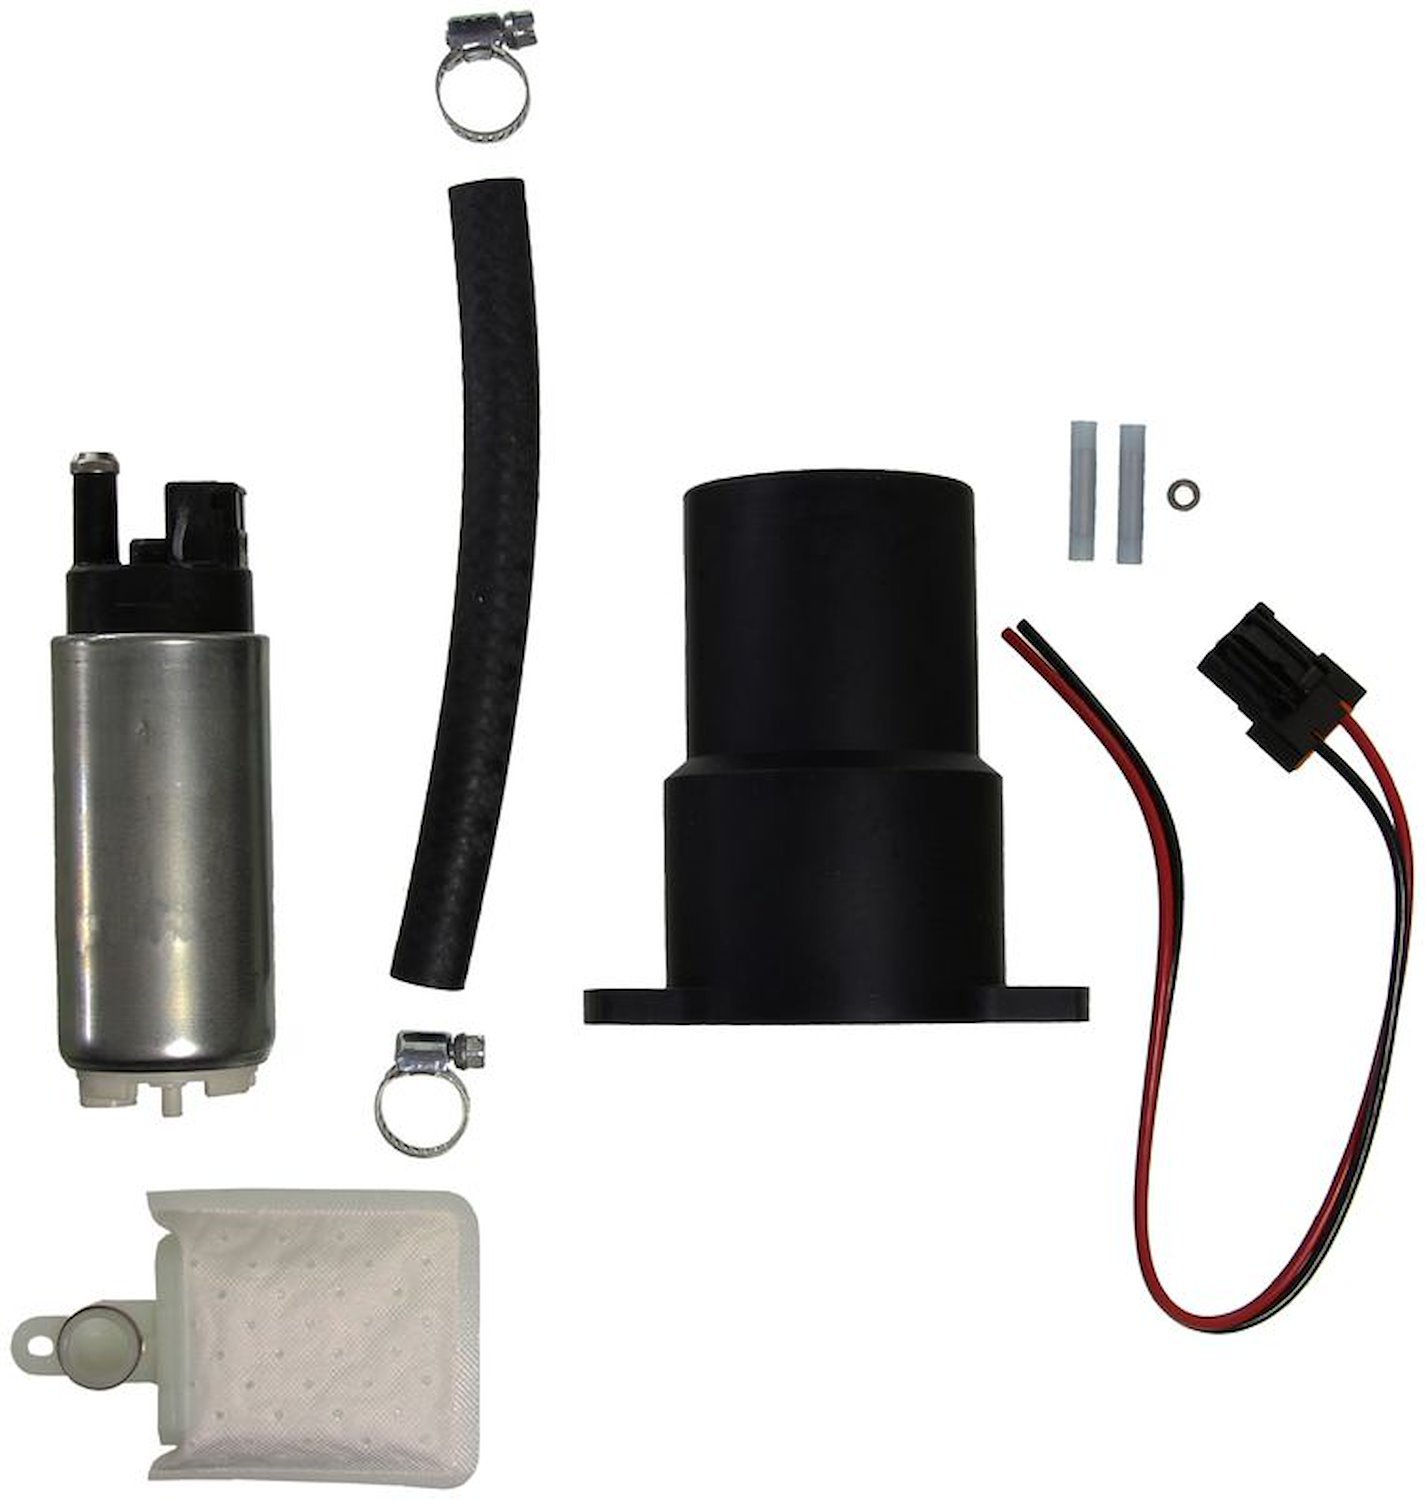 EFI In-Tank Electric Fuel Pump And Strainer Set for 1986-1992,1994 Nissan D21/1995 Nissan Pickup